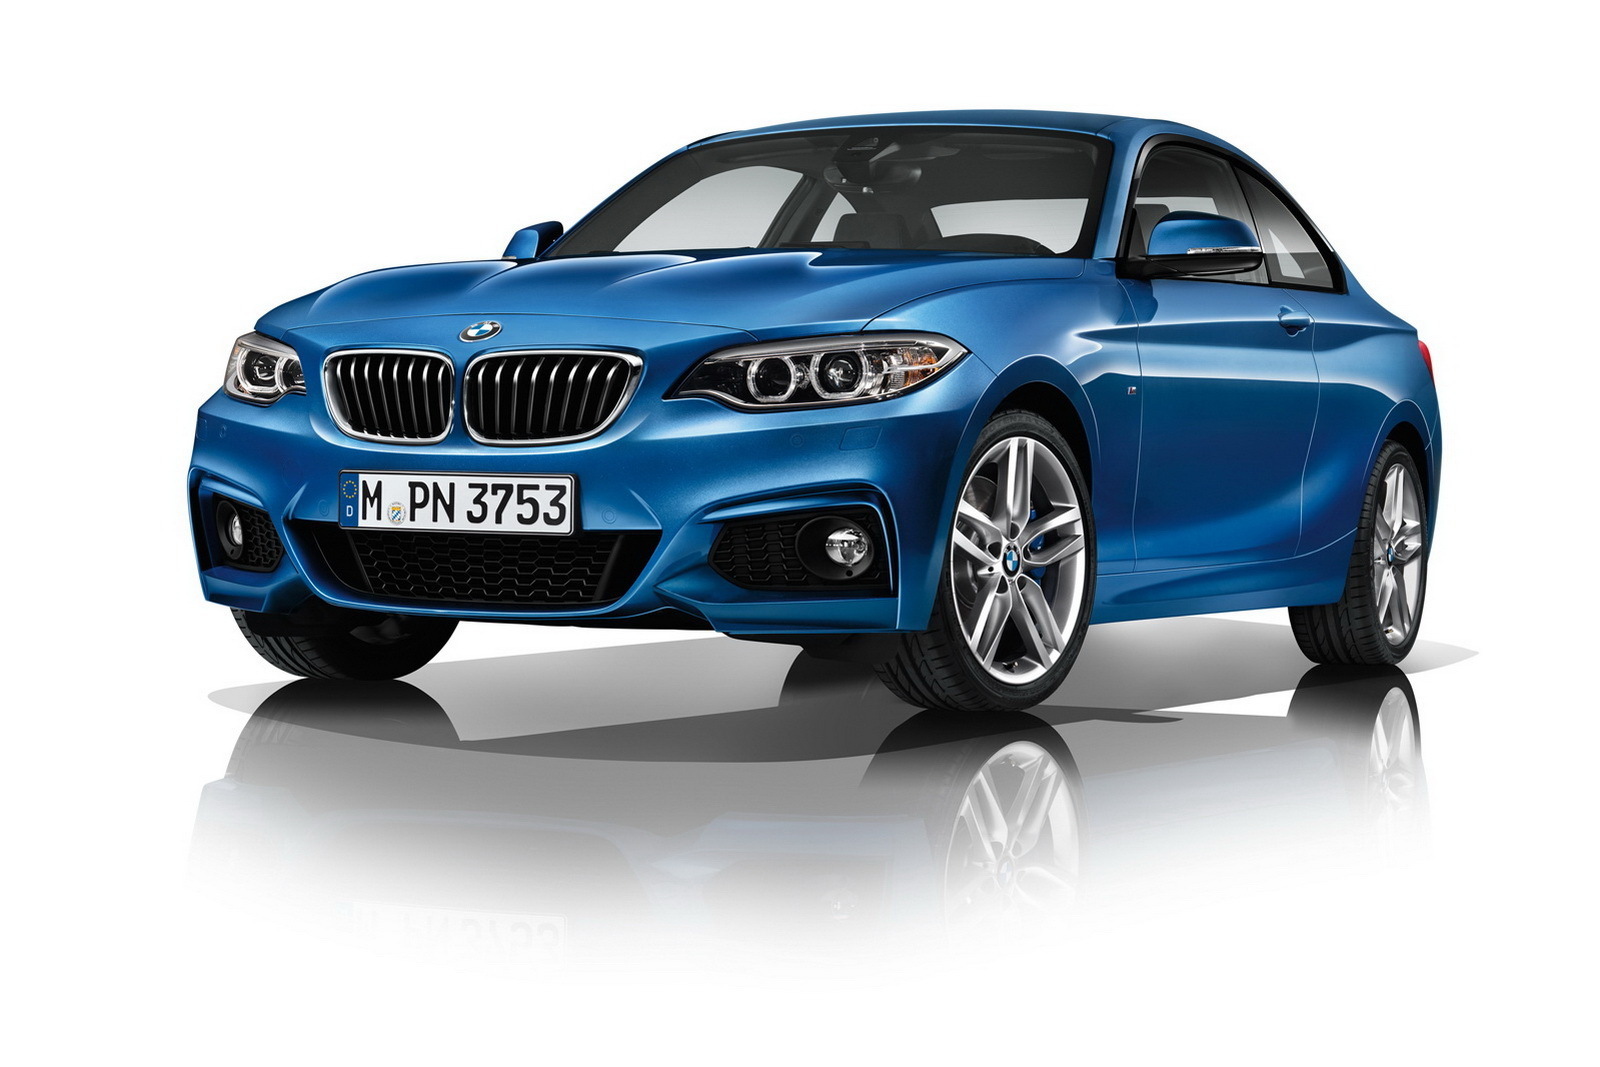  BMW 2 Series Coupe 